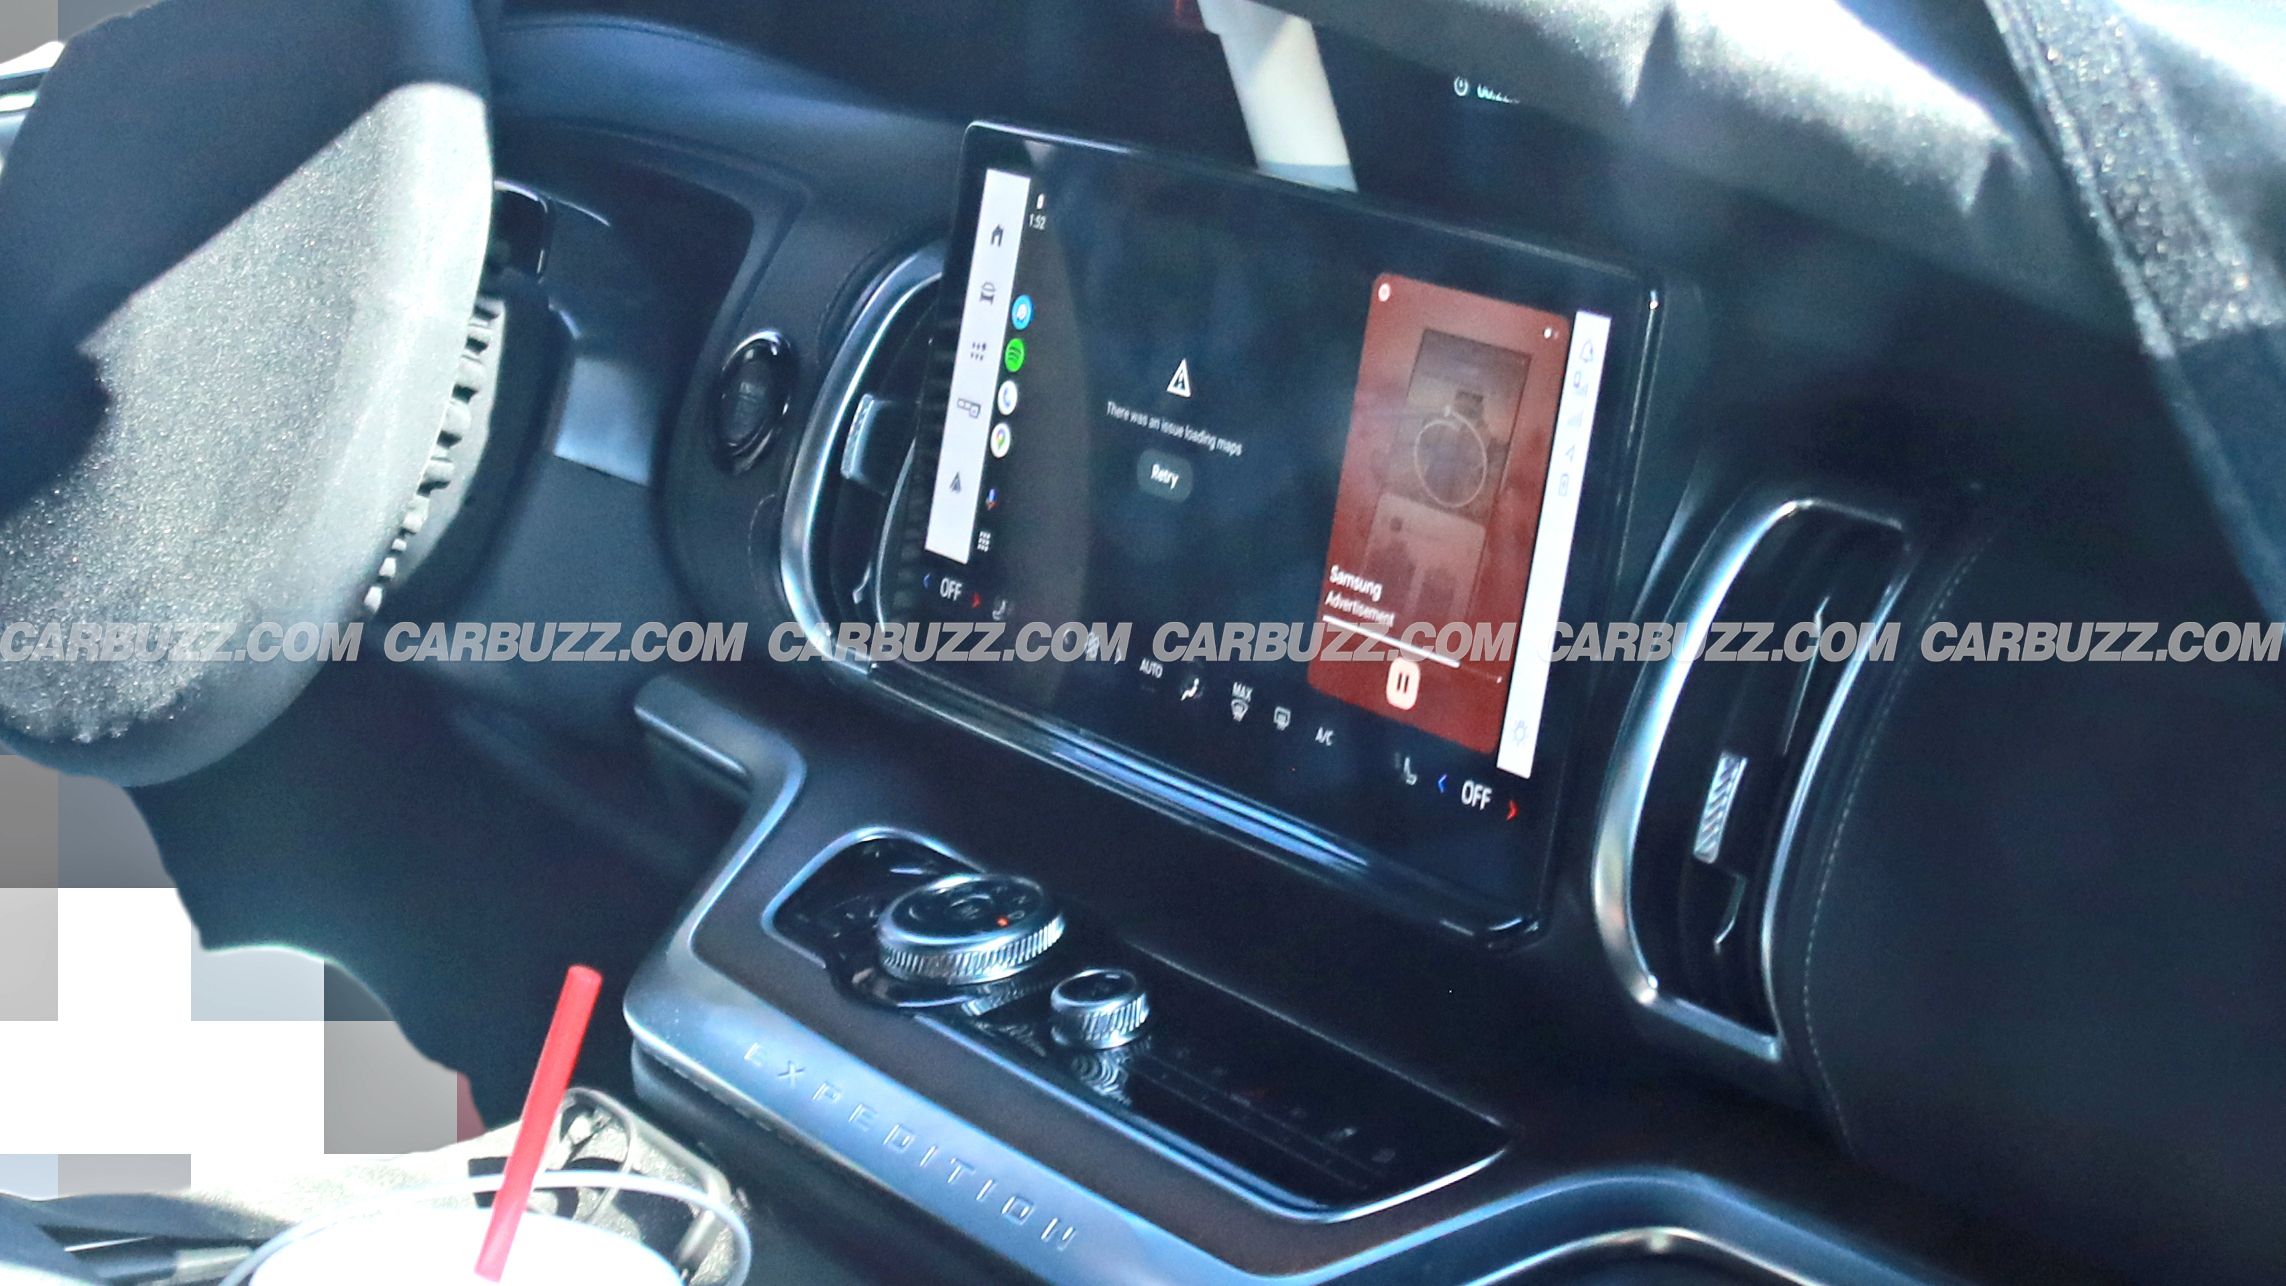 Ford Expedition spy shots depict an 11.1-inch central touchscreen.